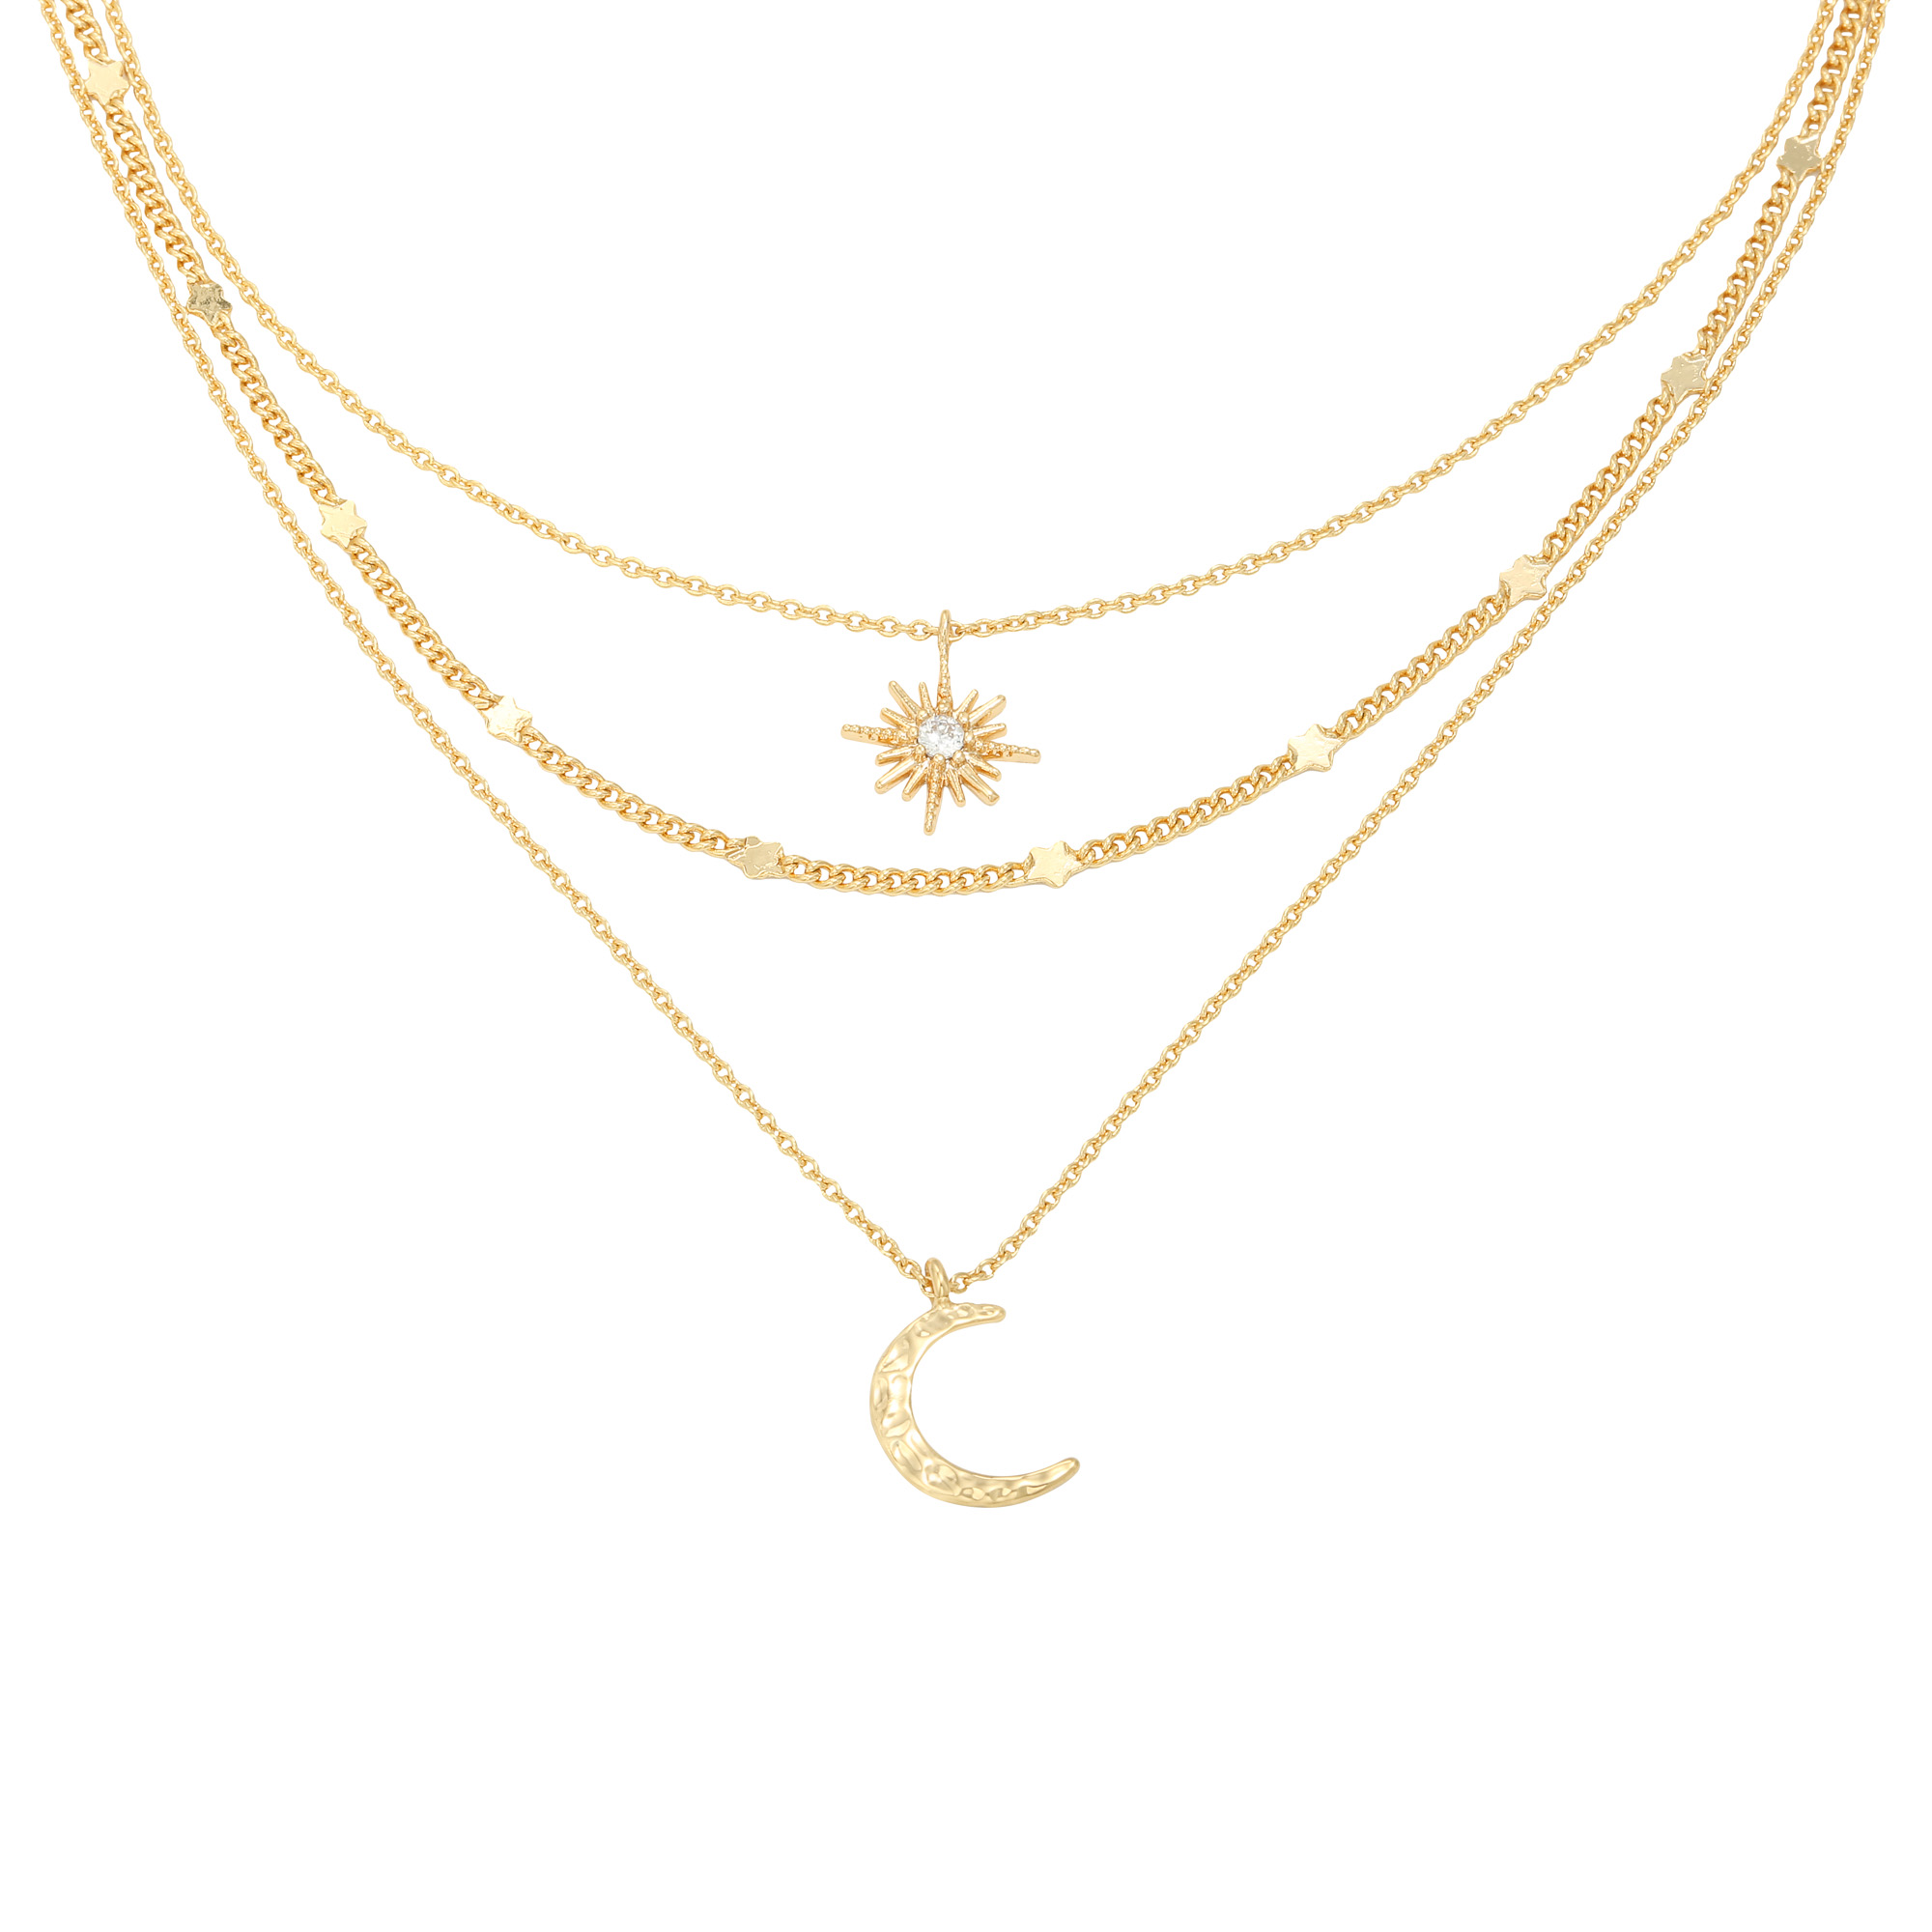 JEWELRY : Yehwang Necklace Chained Star & Moon Wholesale